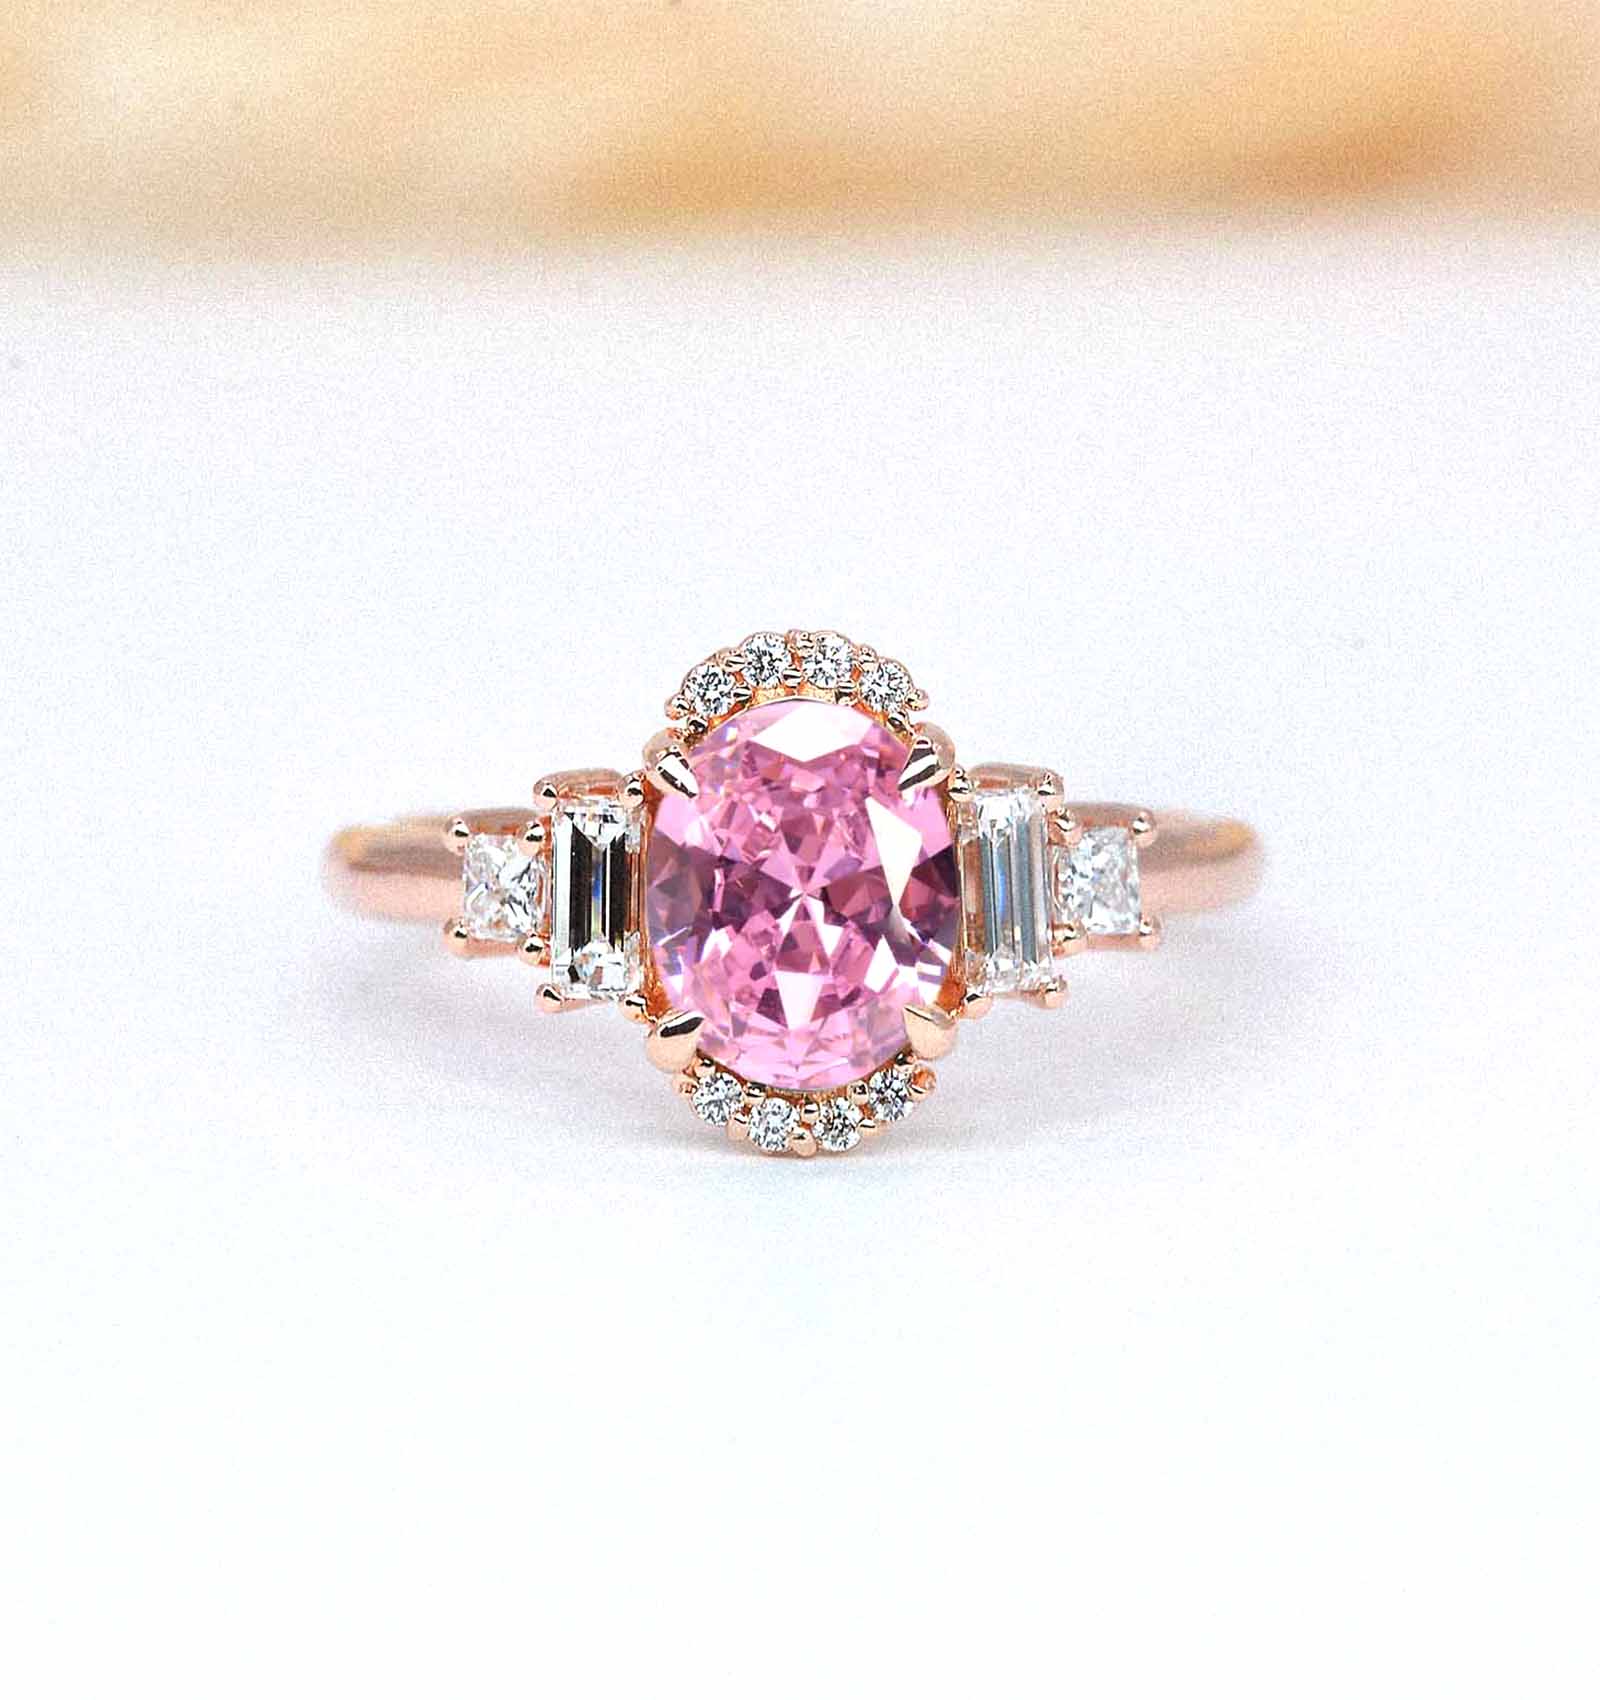 Celebrity pink sapphire ring